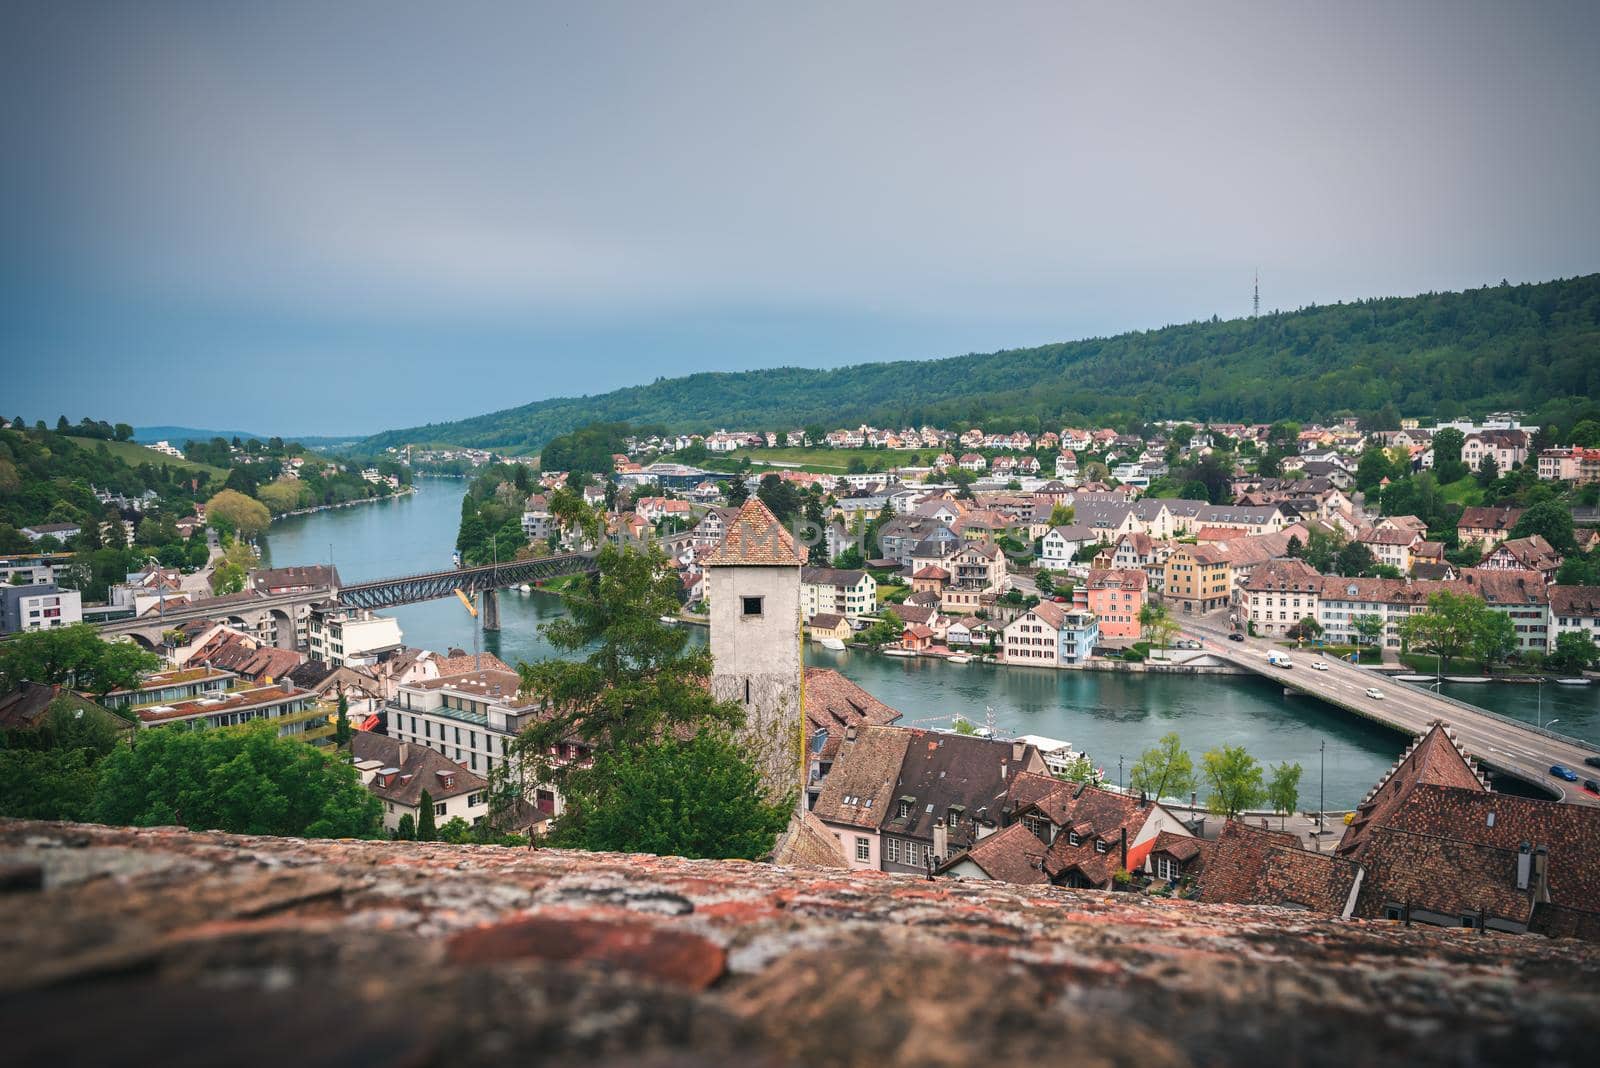 Cityscape Old Town and Historic Buildings of Schaffhausen City, Switzerland, Beautiful Ancient Church and Architecture of Swiss Culture at Daylight. Travel Historical and Famous Place of Switzerland